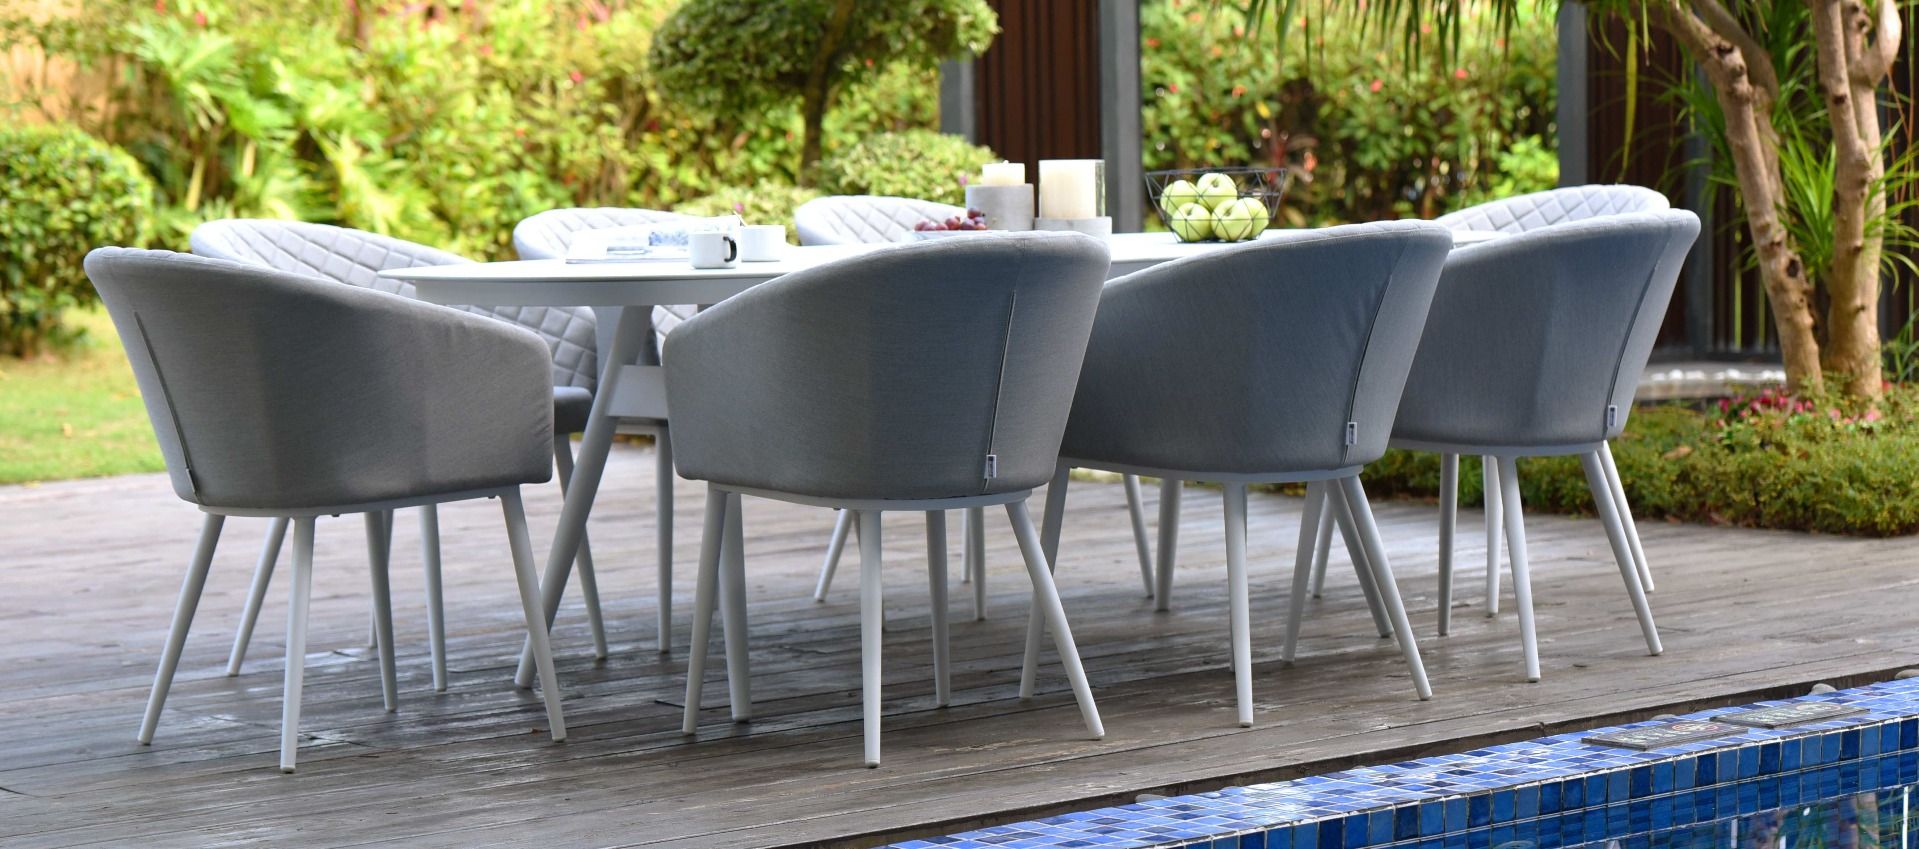 All-Match outdoor and indoor Dining Set 